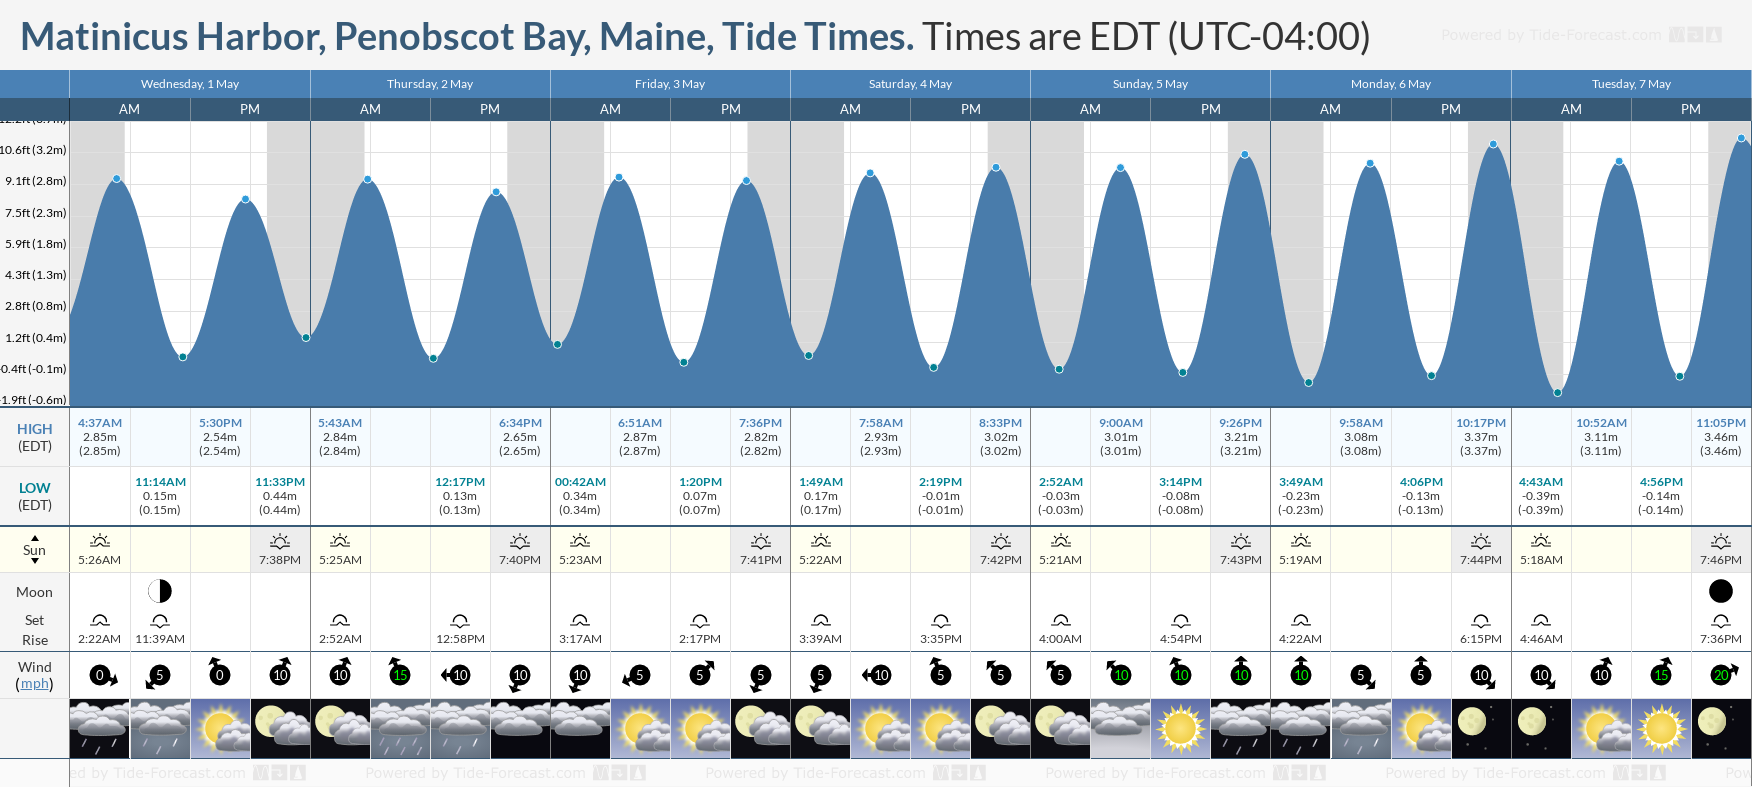 Matinicus Harbor, Penobscot Bay, Maine Tide Chart including high and low tide times for the next 7 days